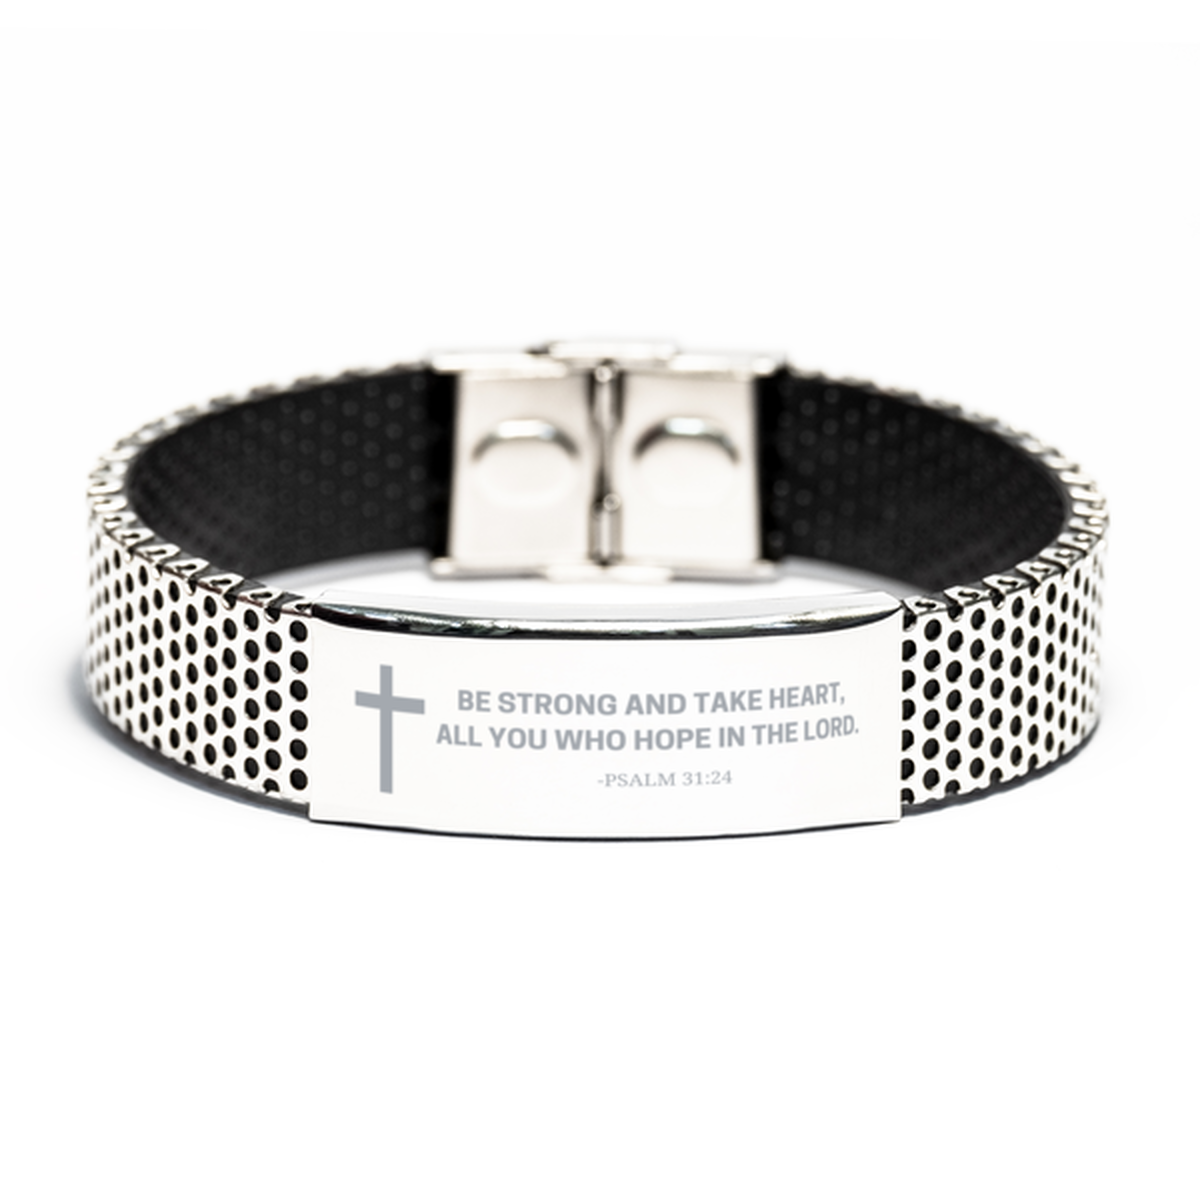 Baptism Gifts For Teenage Boys Girls, Christian Bible Verse Stainless Steel Bracelet, Be strong and take heart, Catholic Confirmation Gifts for Son, Godson, Grandson, Nephew